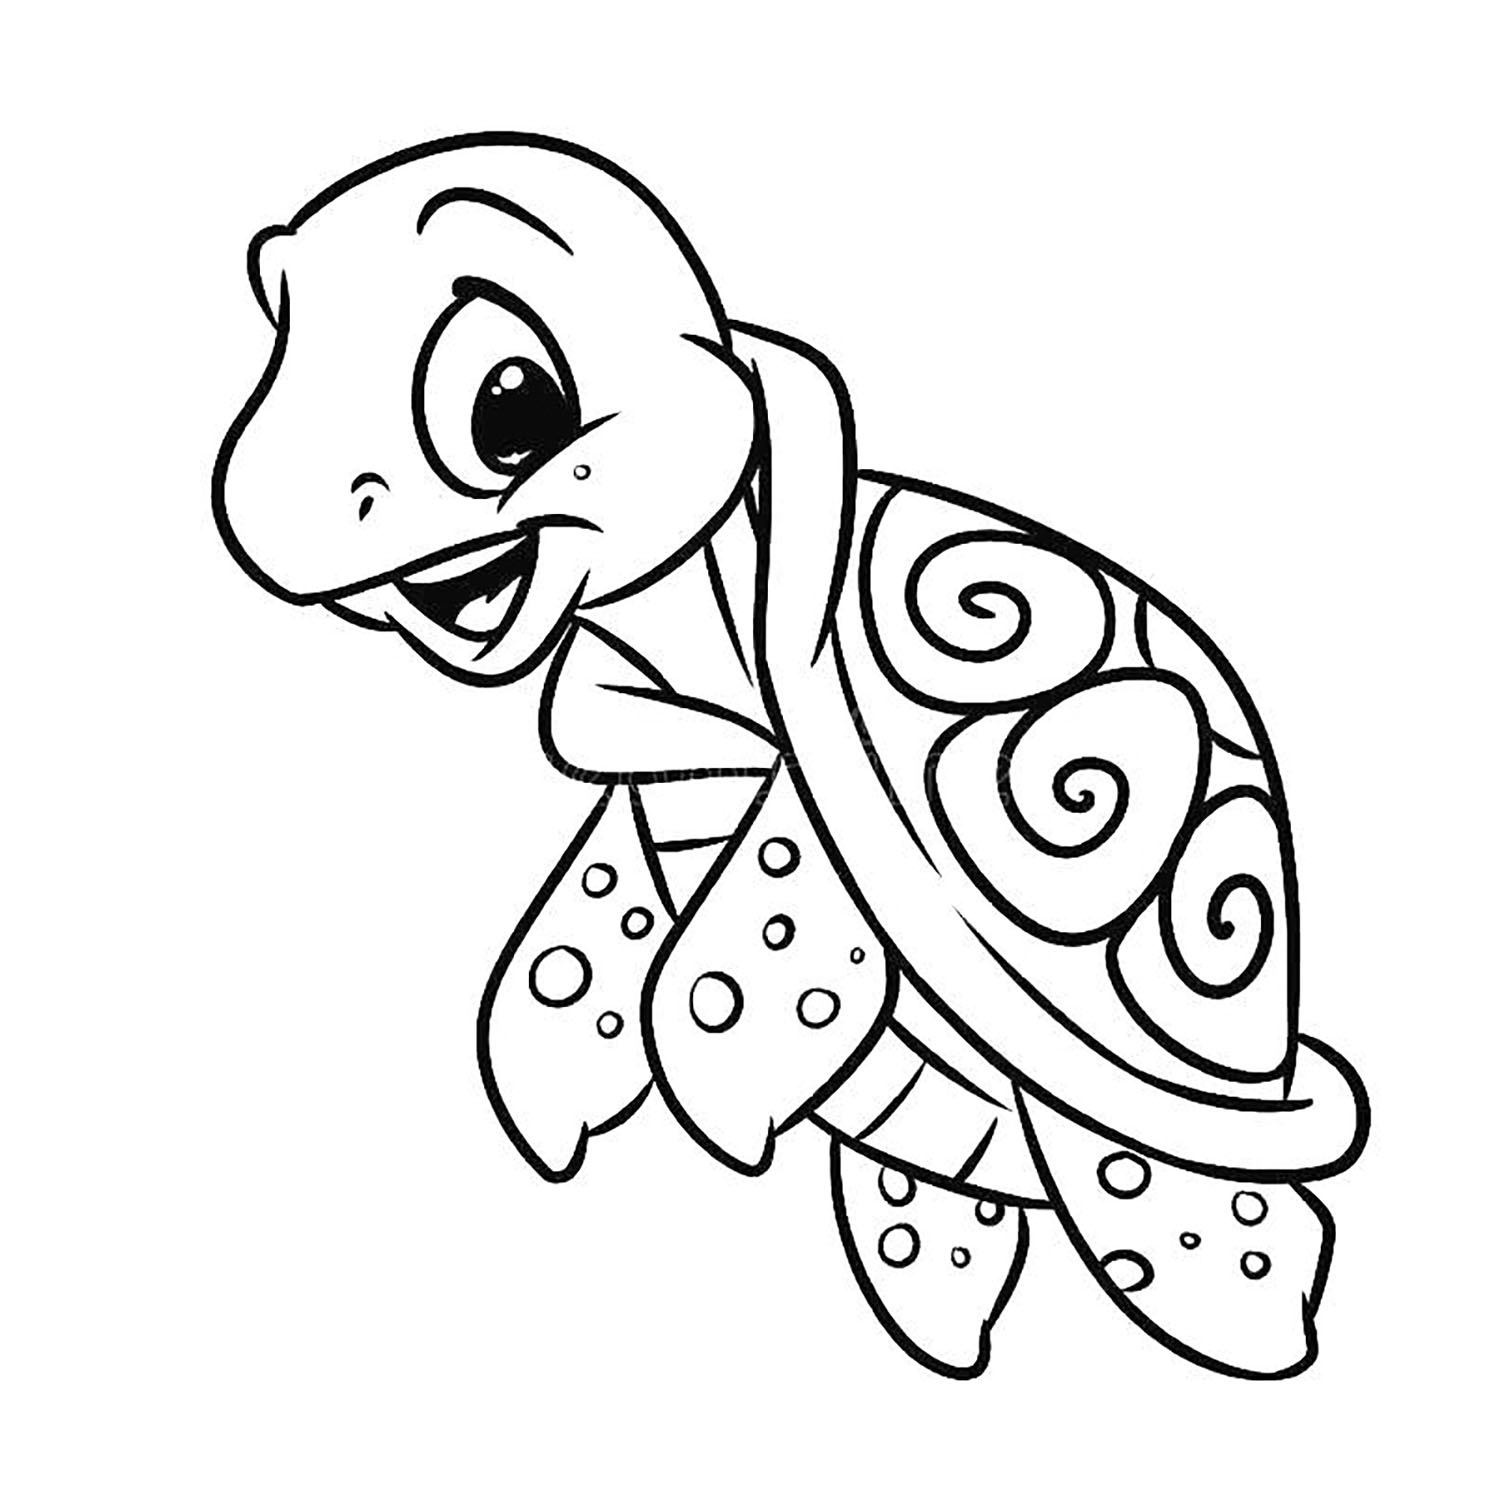 turtles-for-children-turtles-kids-coloring-pages